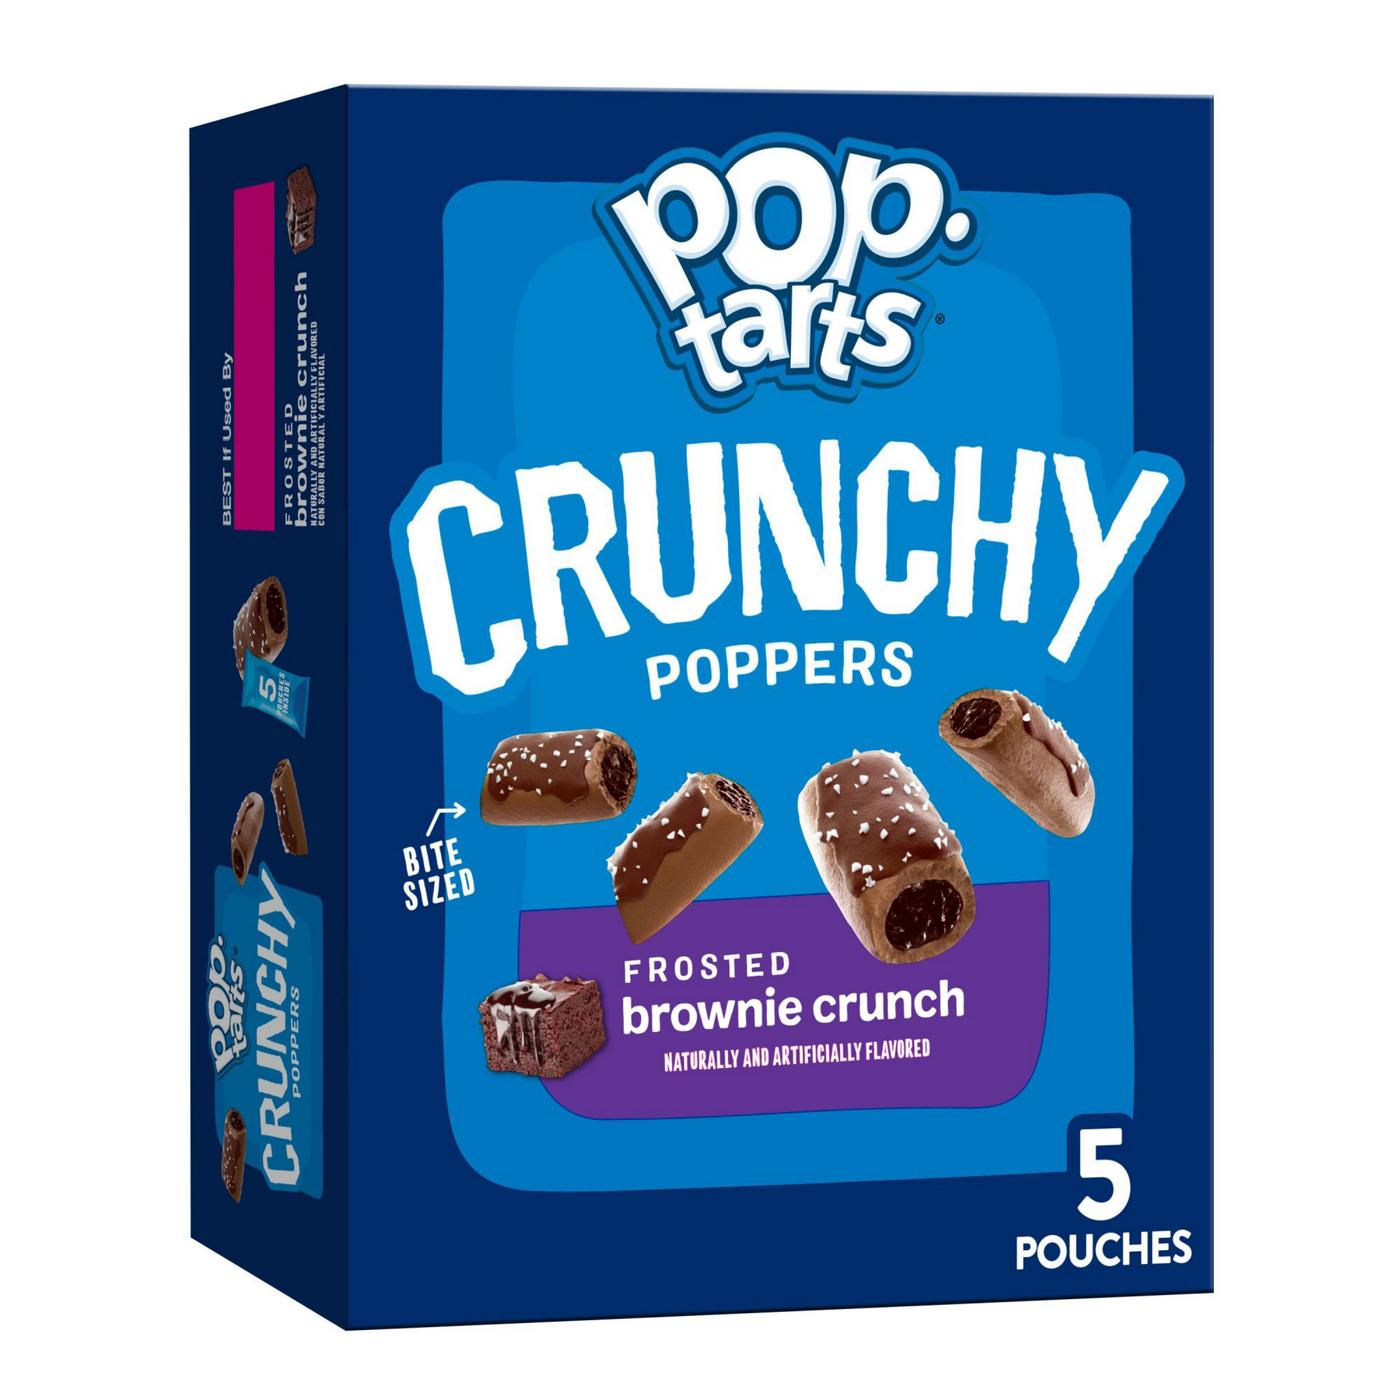 Pop-Tarts Crunchy Poppers Frosted Brownie Crunch Crunchy Filled Snack Pieces; image 6 of 6